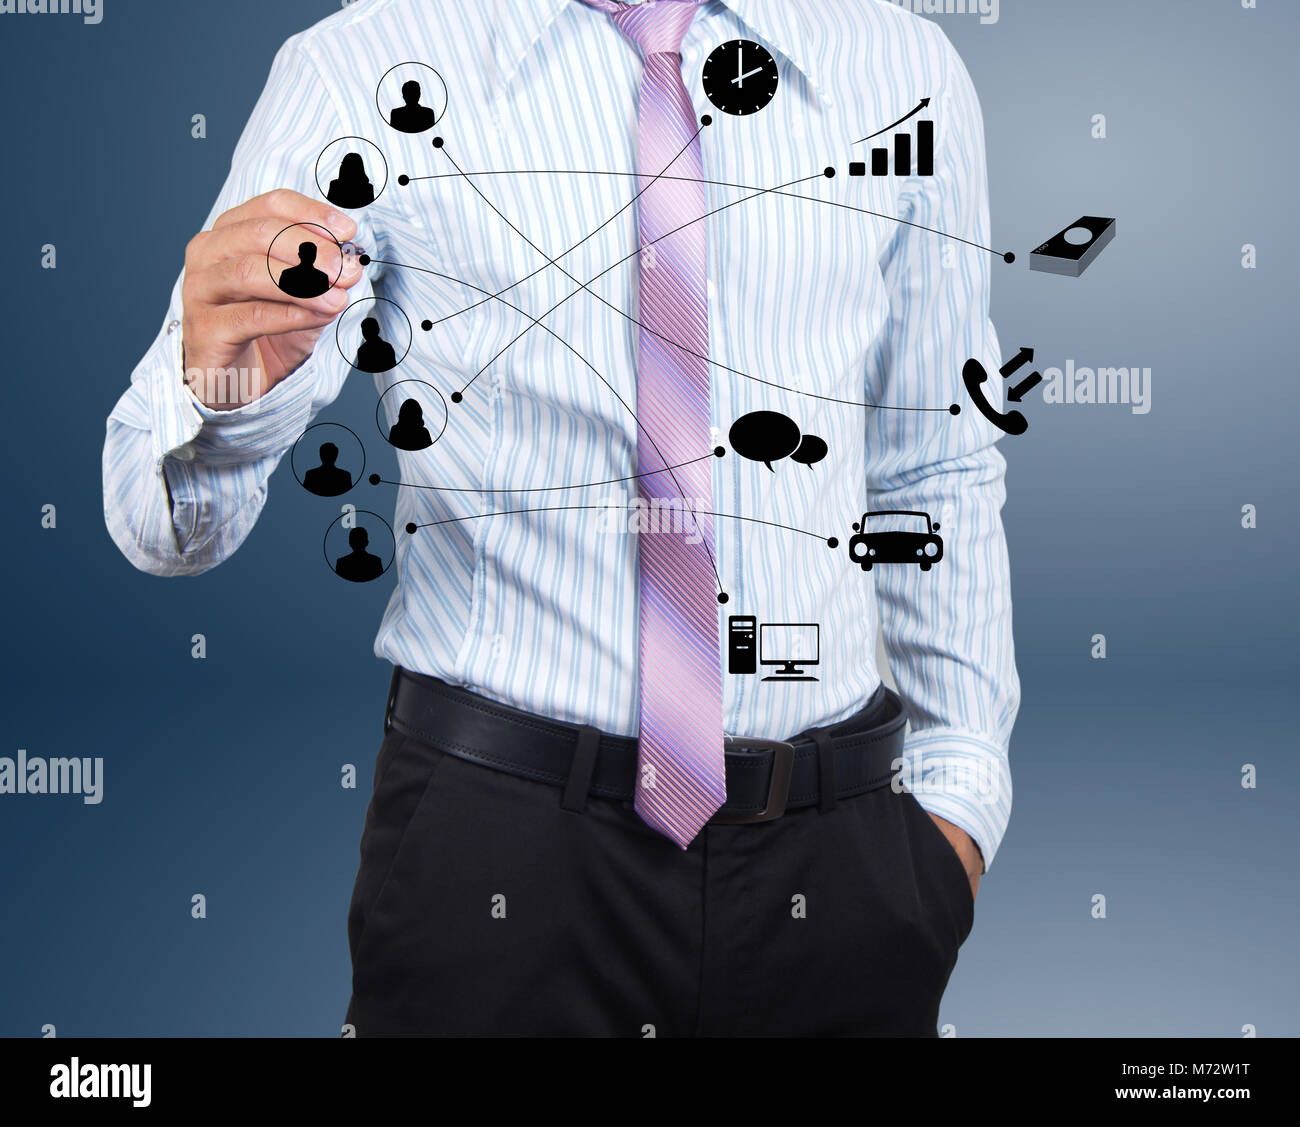 Concept about business leaders. teamwork. Stock Photo